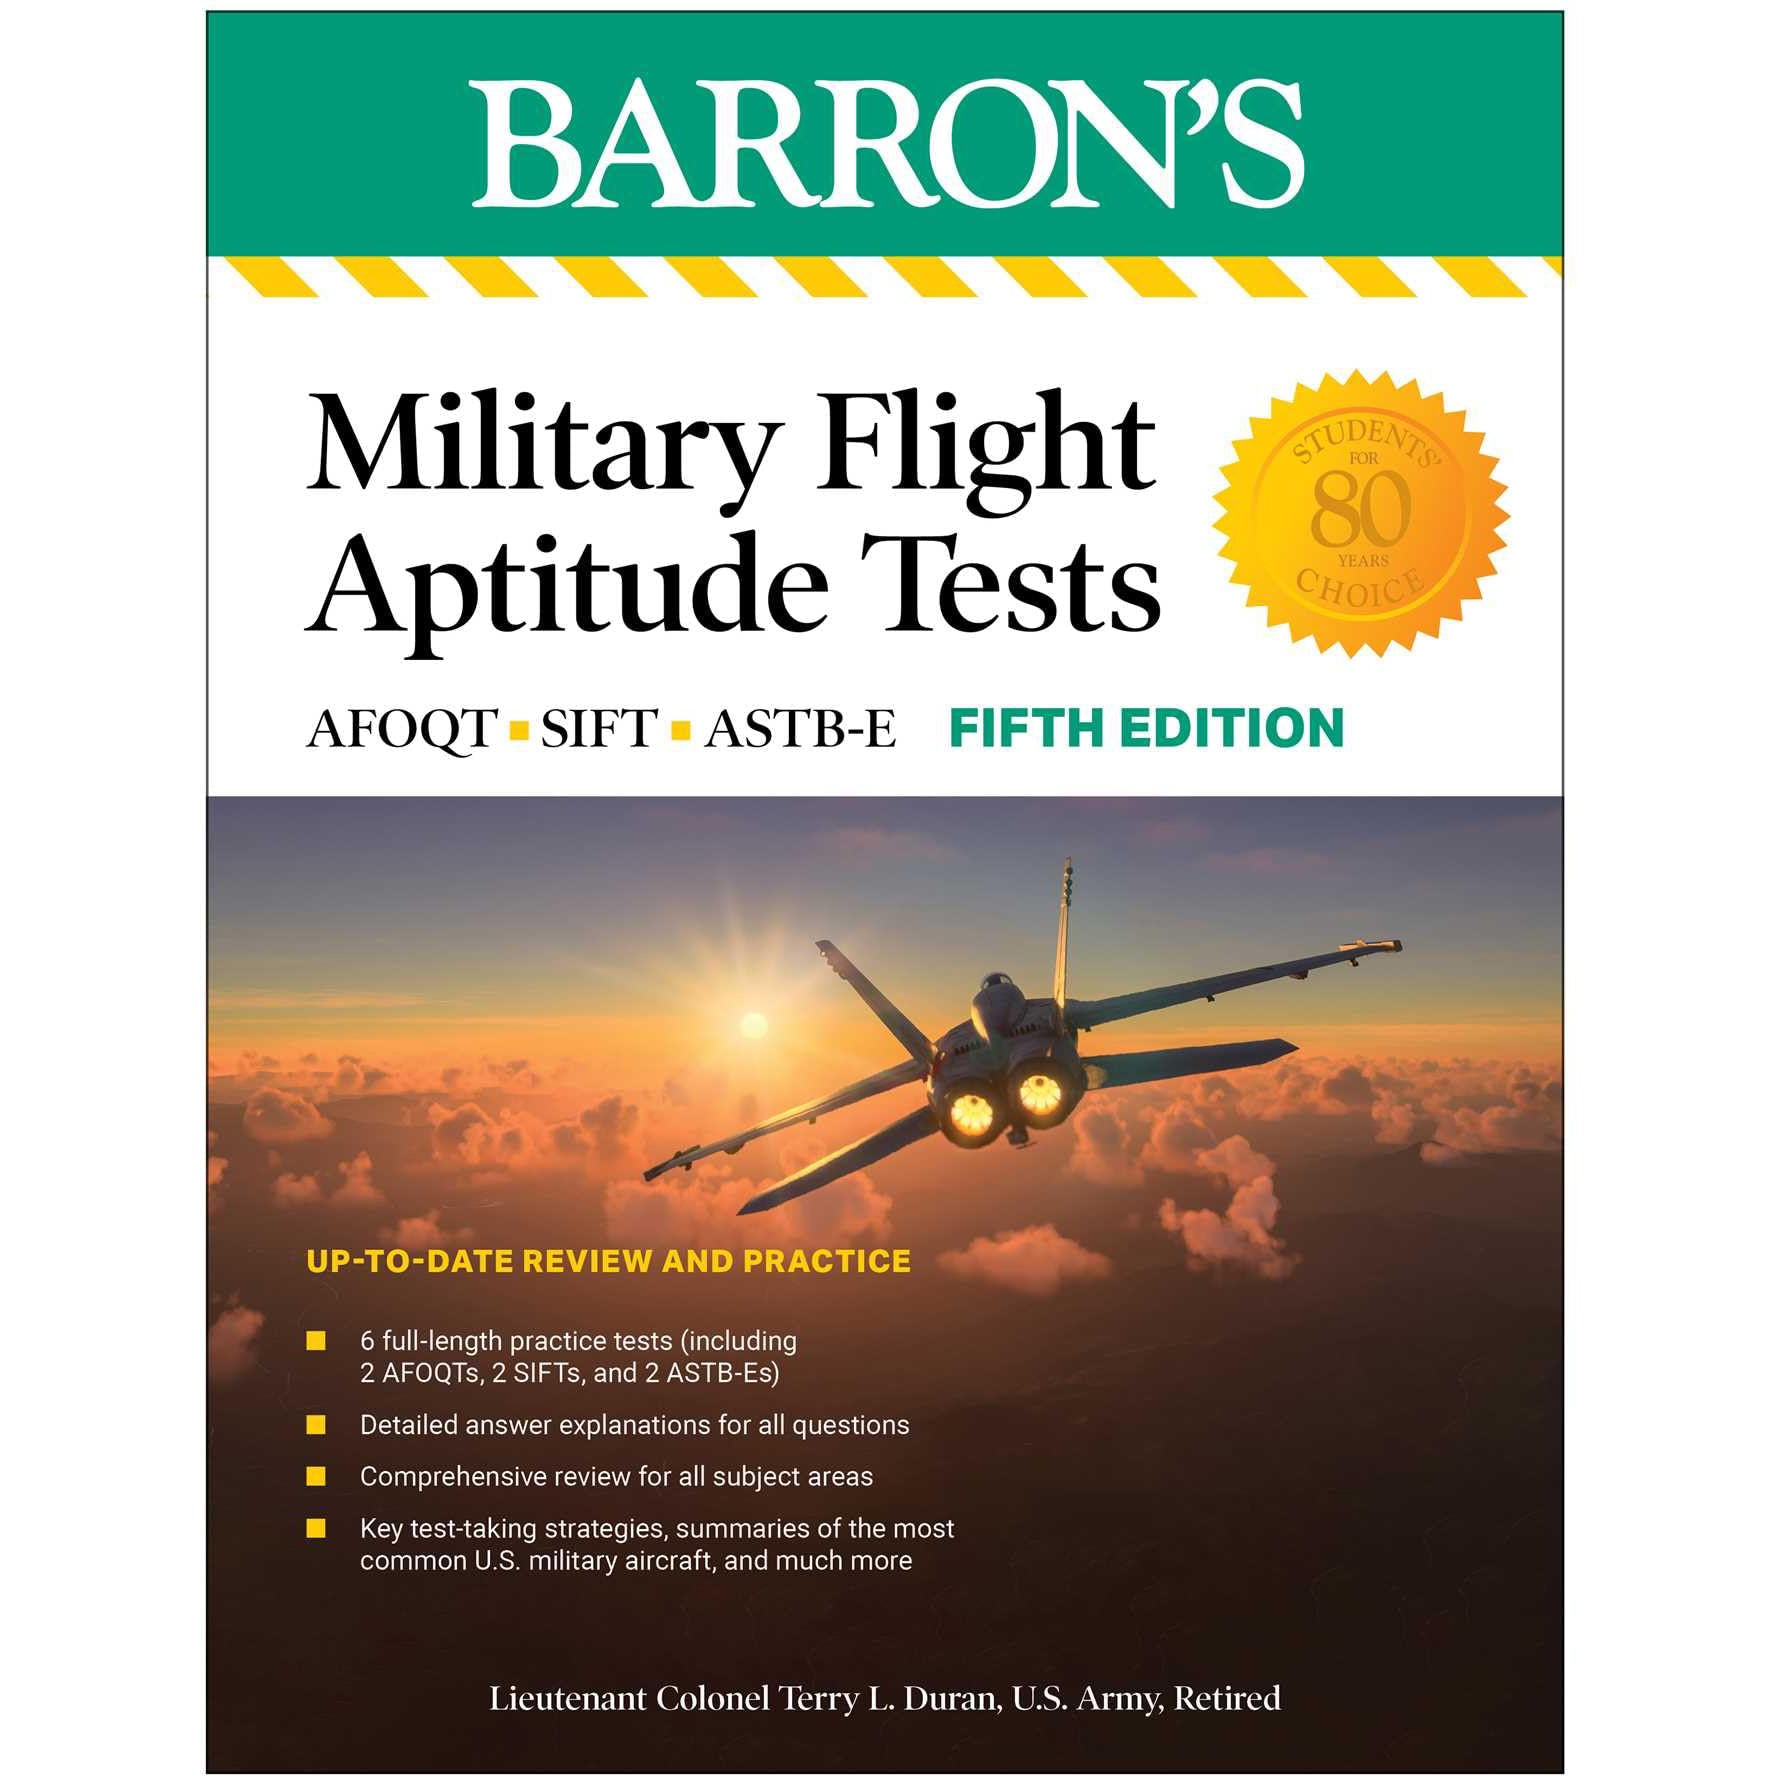 Military Flight Aptitude Tests, Fifth Edition: 6 Practice Tests + Comprehensive Review (Barron's Test Prep) (5th Edition) - PilotMall.com